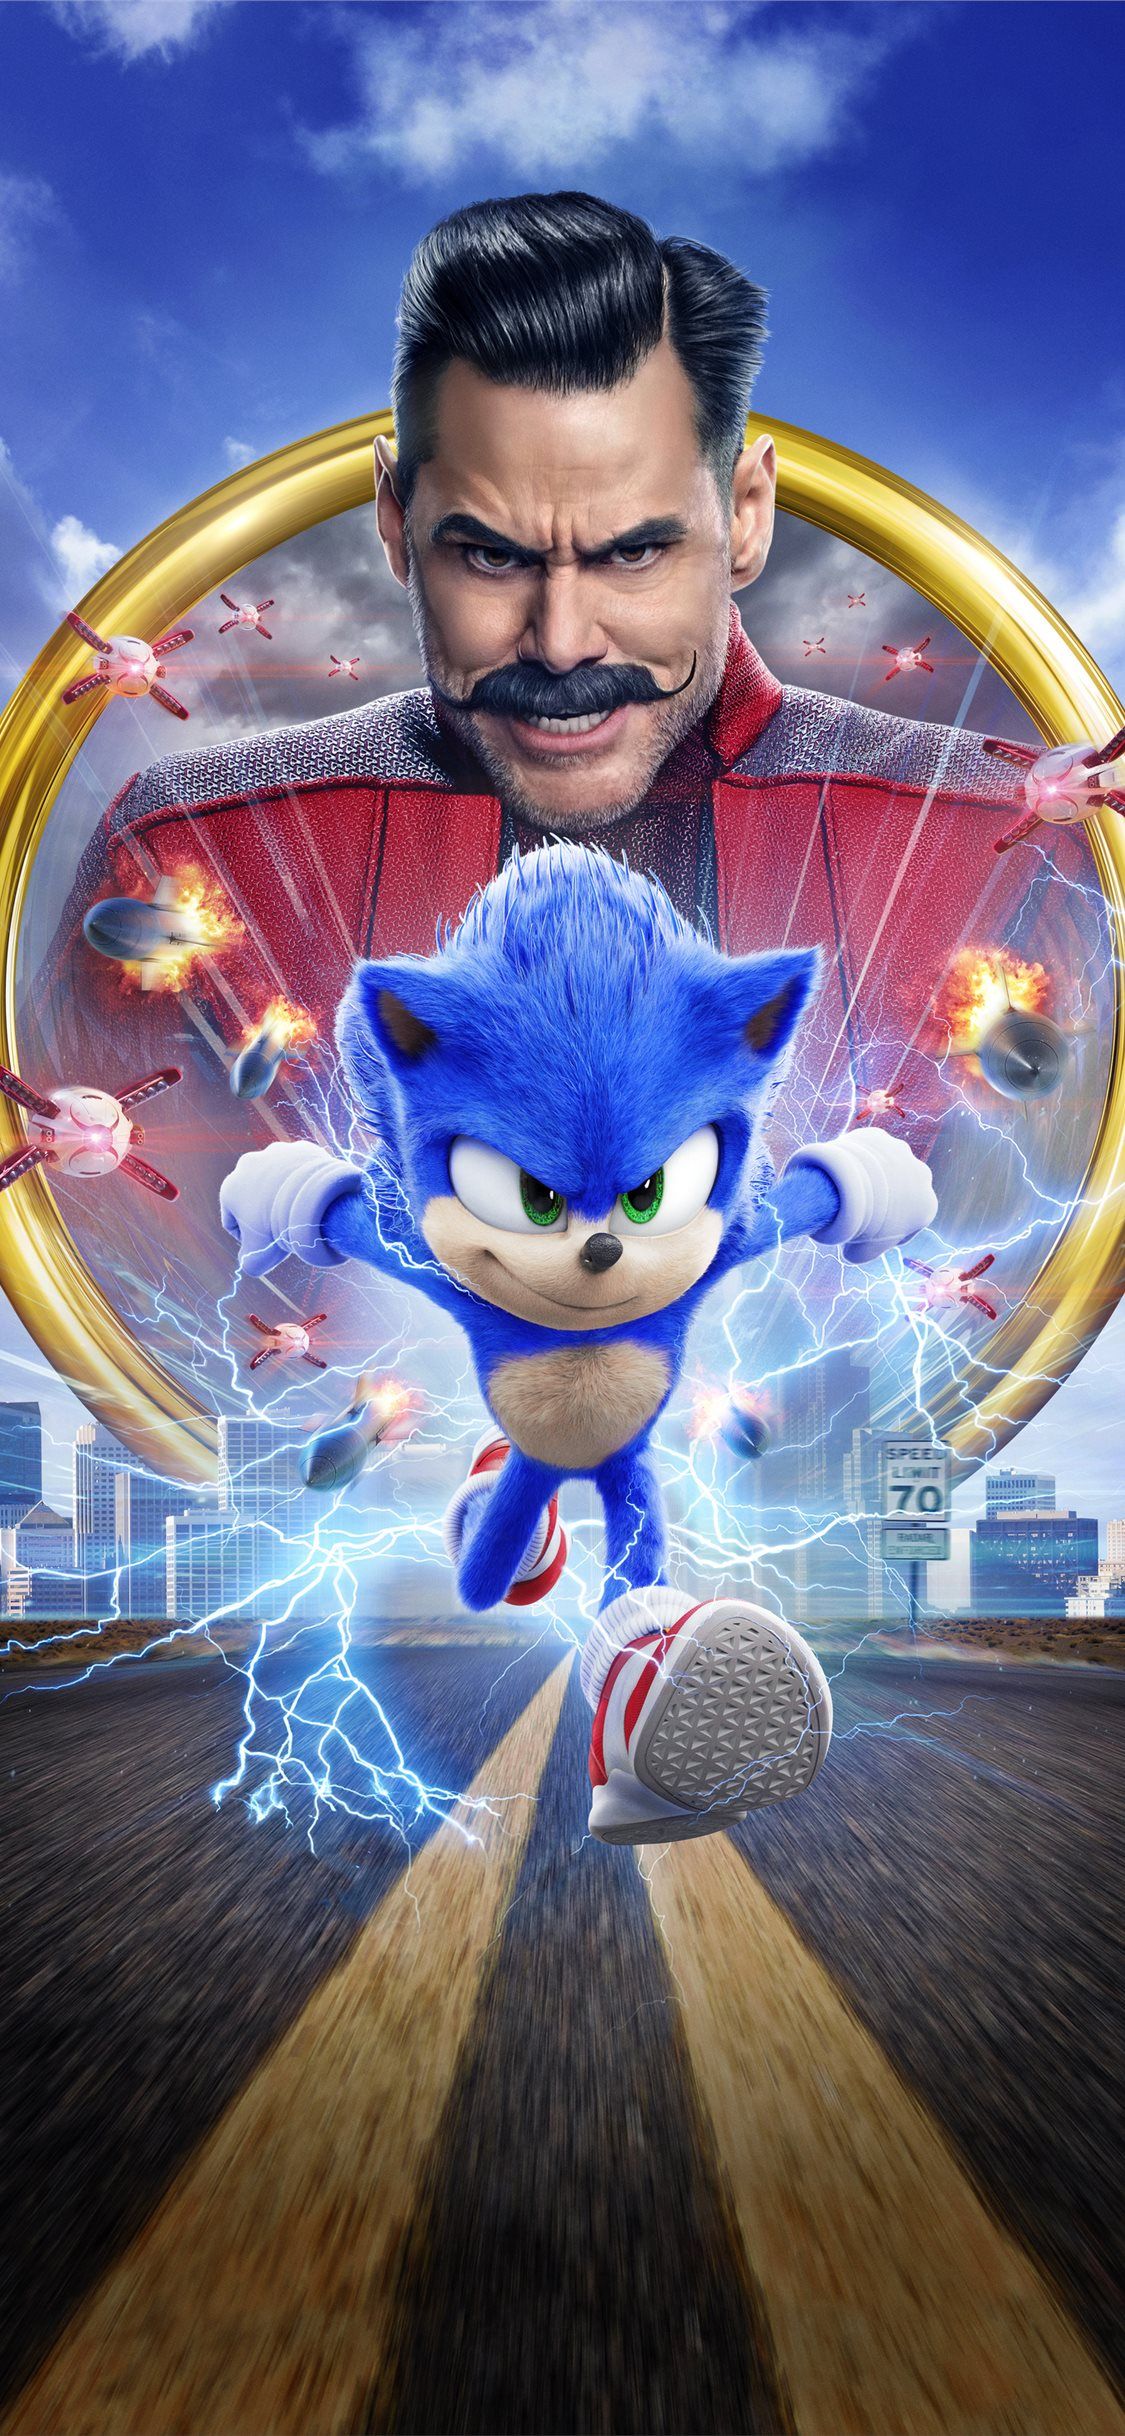 sonic the hedgehog movie 8k iPhone X Wallpaper Free Download